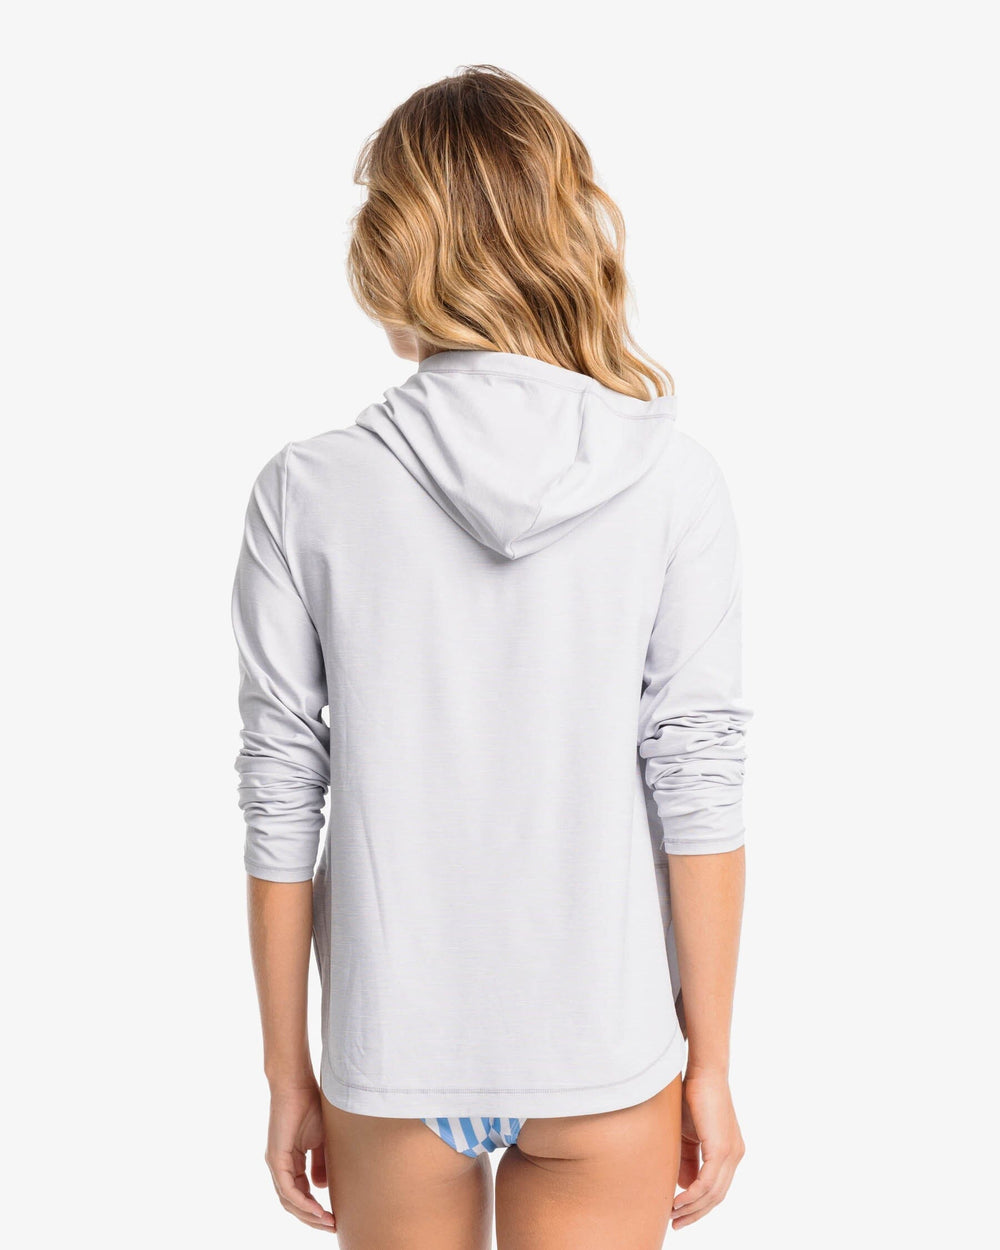 The back view of the Southern Tide Linley brrr illiant Performance Hoodie by Southern Tide - Platinum Grey